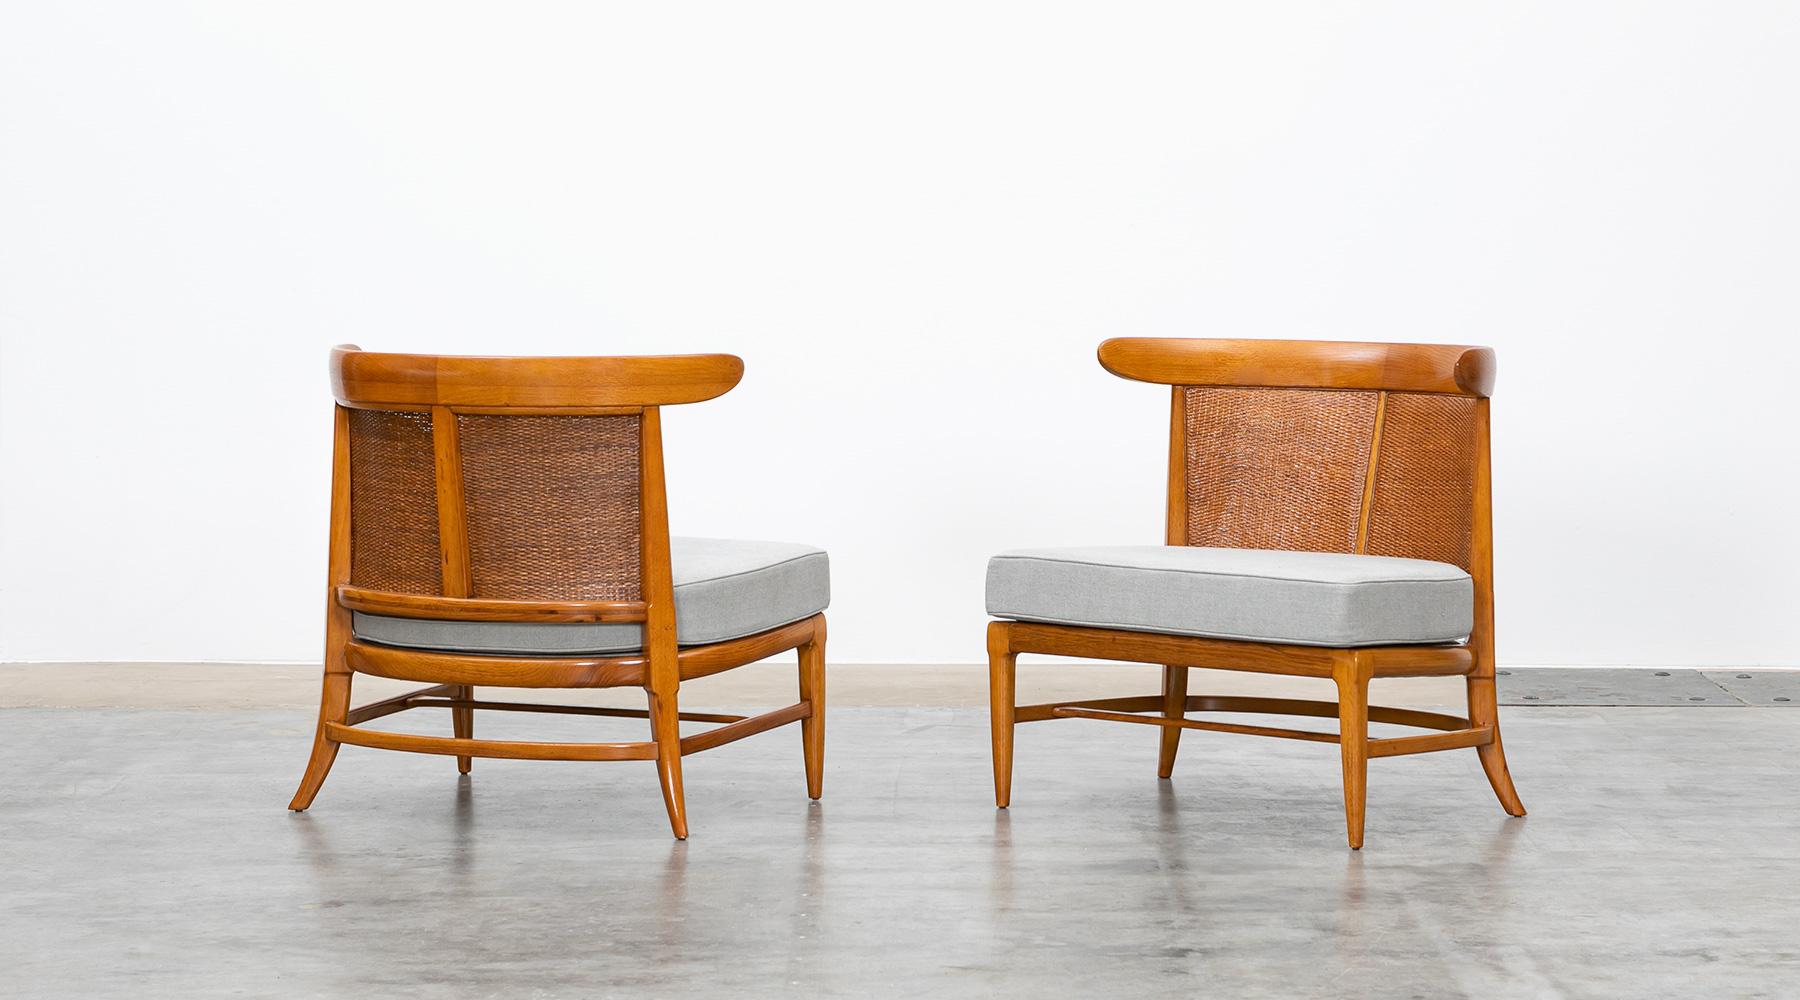 American brown walnut and cane, lounge chairs, Lubberts & Mulder, 1950s, USA.

Pair of curved caned back lounge chairs designed by John Lubberts and Lambert Mulder in America in circa 1950s. These low slung lounge chairs look great from any angle.